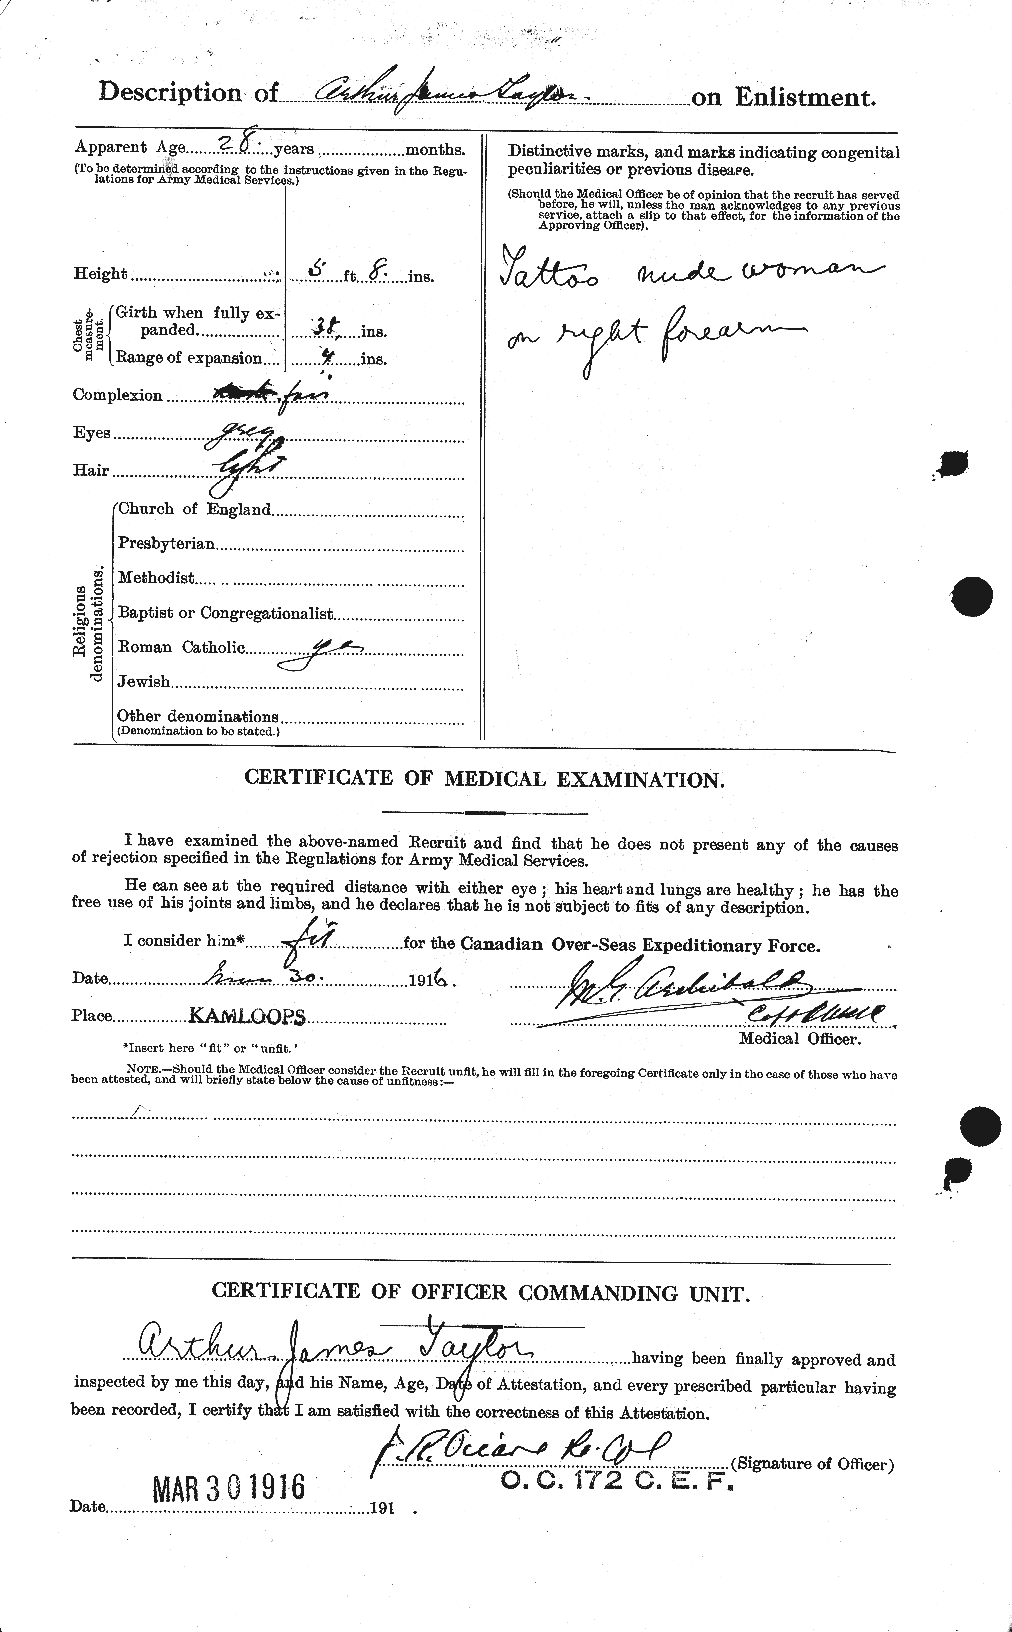 Personnel Records of the First World War - CEF 626732b